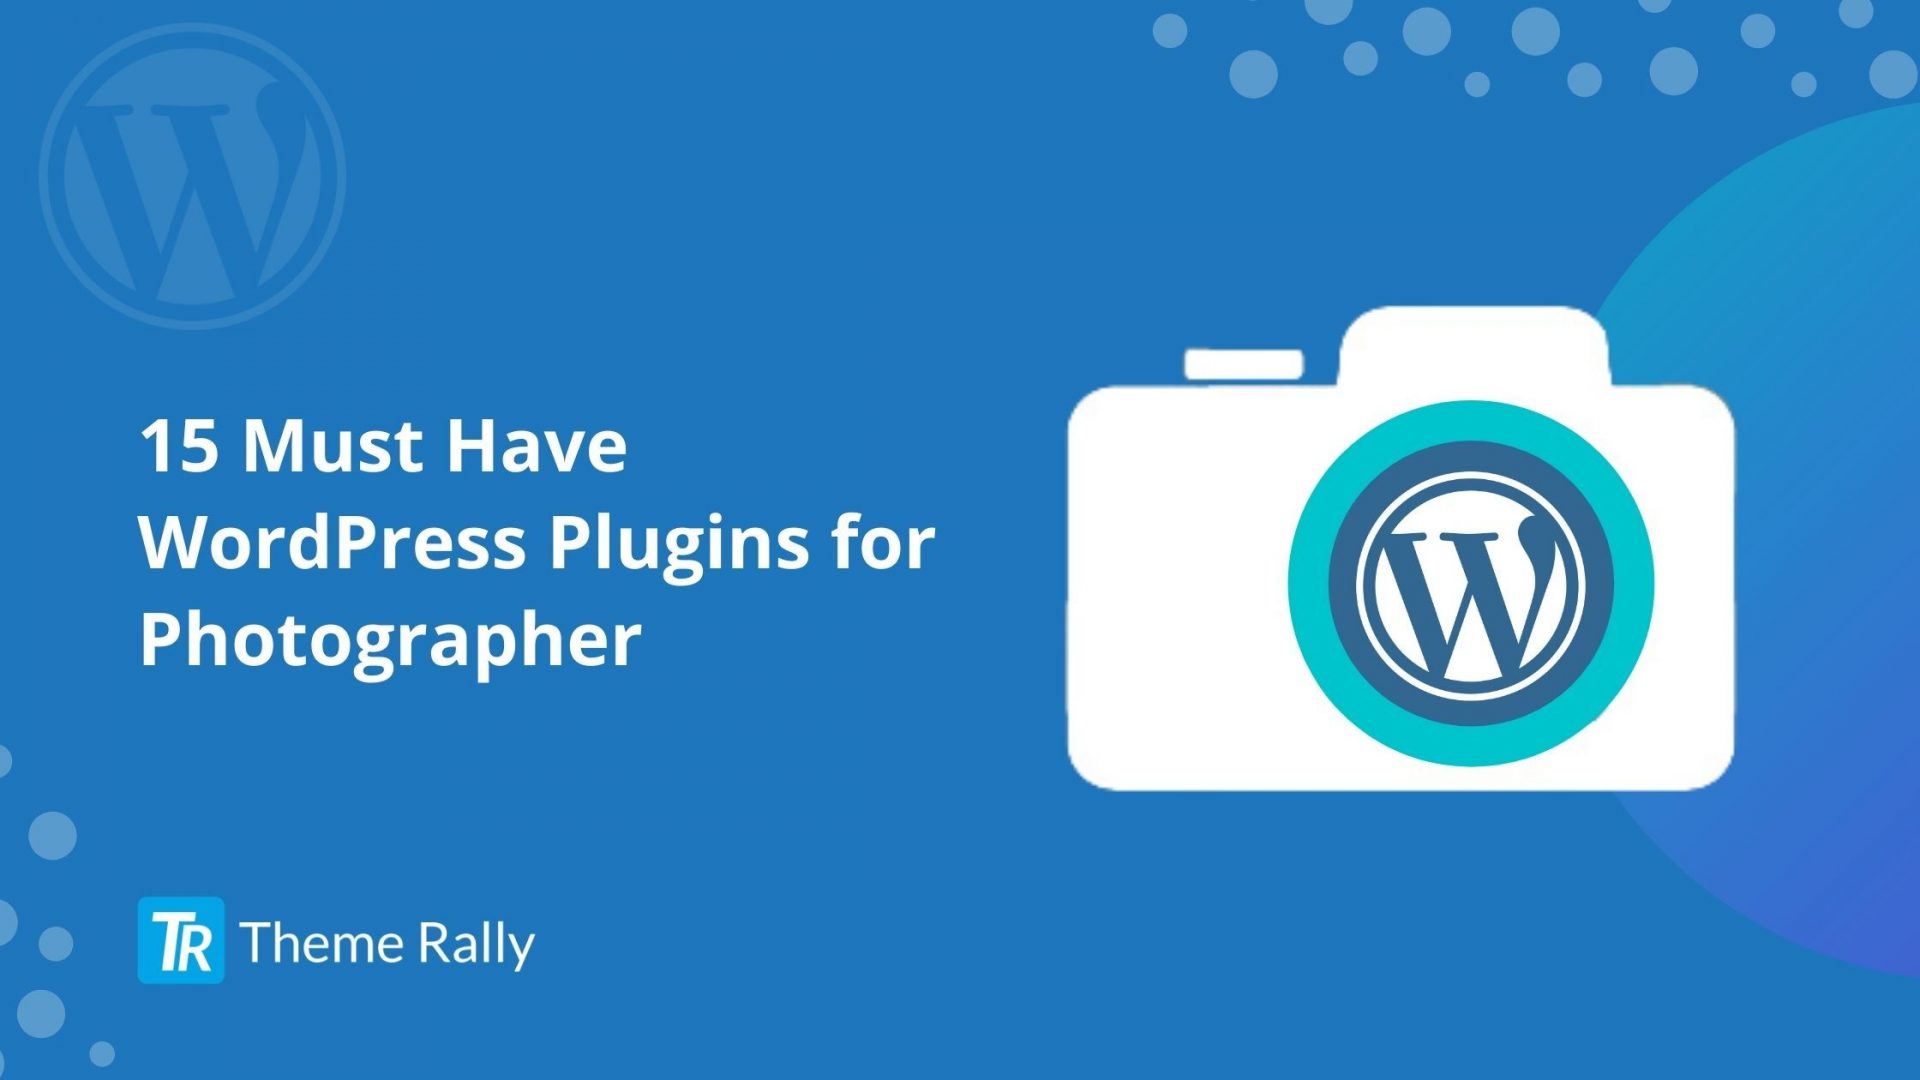 15 Must Have WordPress Plugins for Photographer